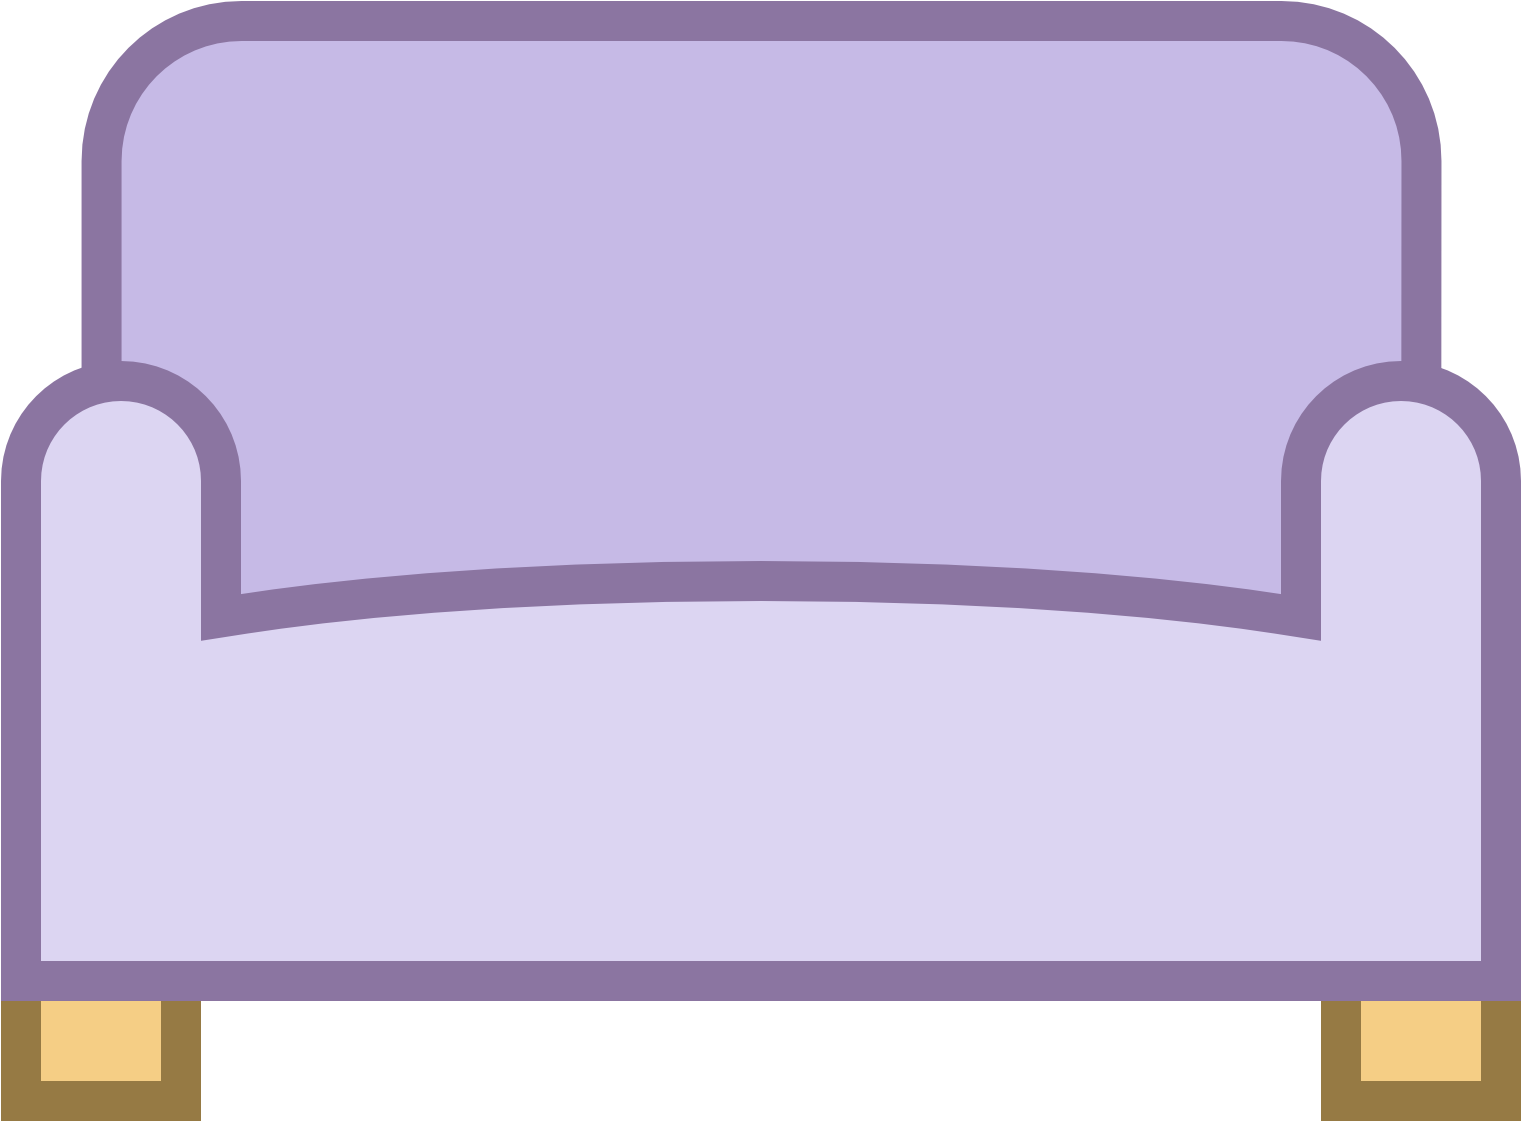 Purple Couch Clipart PNG image